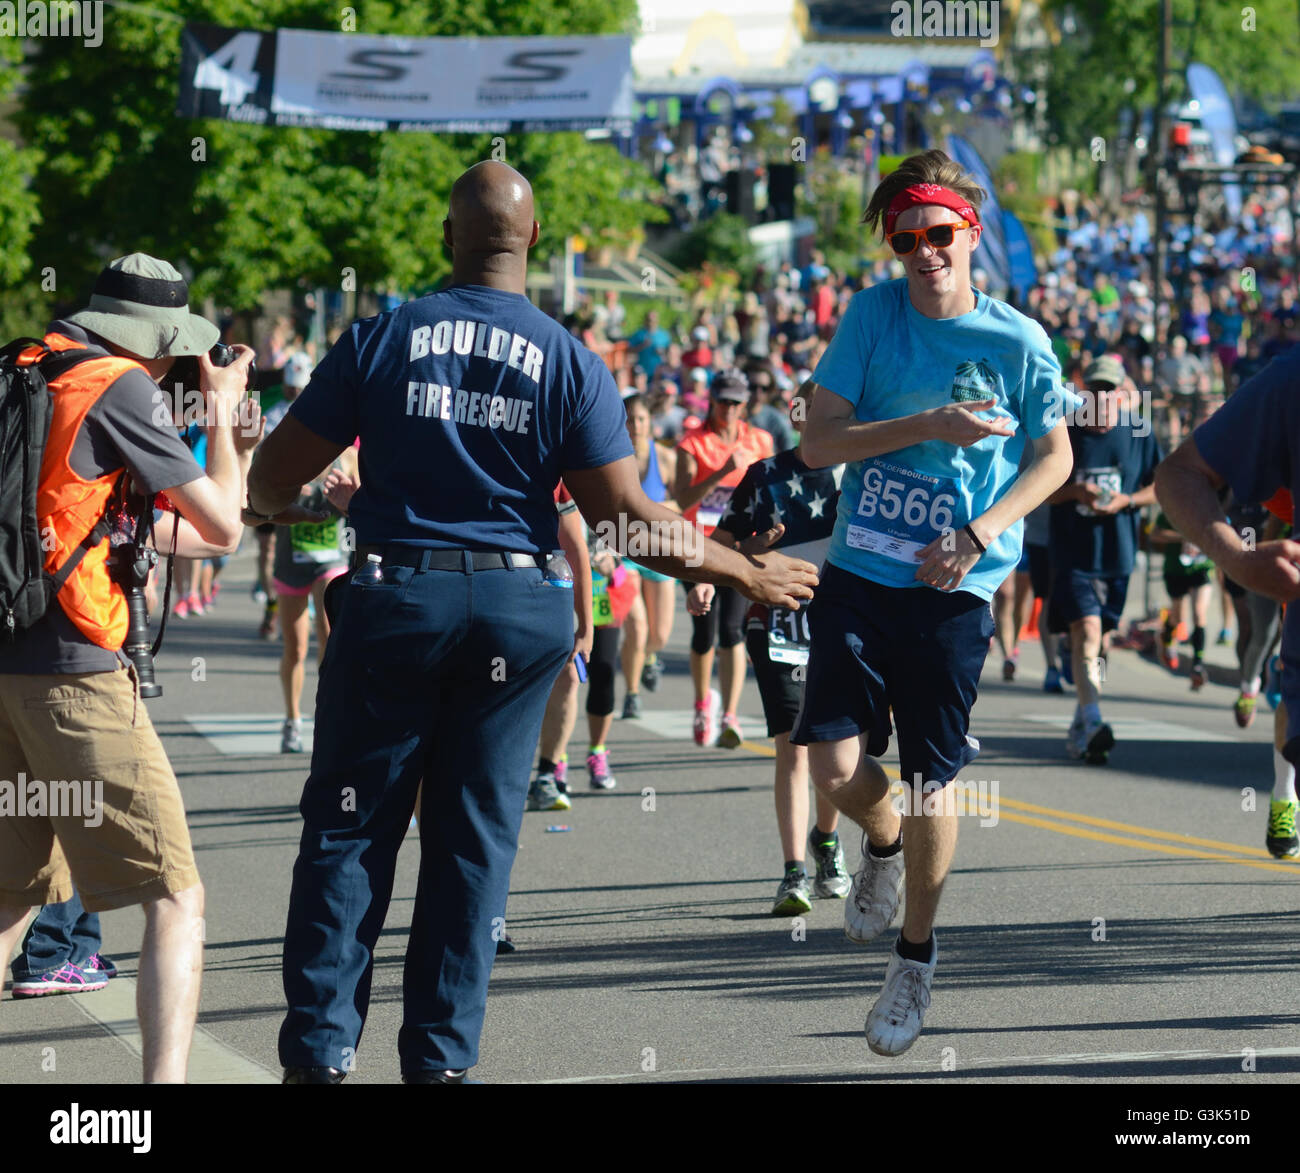 Boulder firefighter offers water to participant in the 2016 Bolder Boulder 10K. More than 50,000 participate each year. Stock Photo